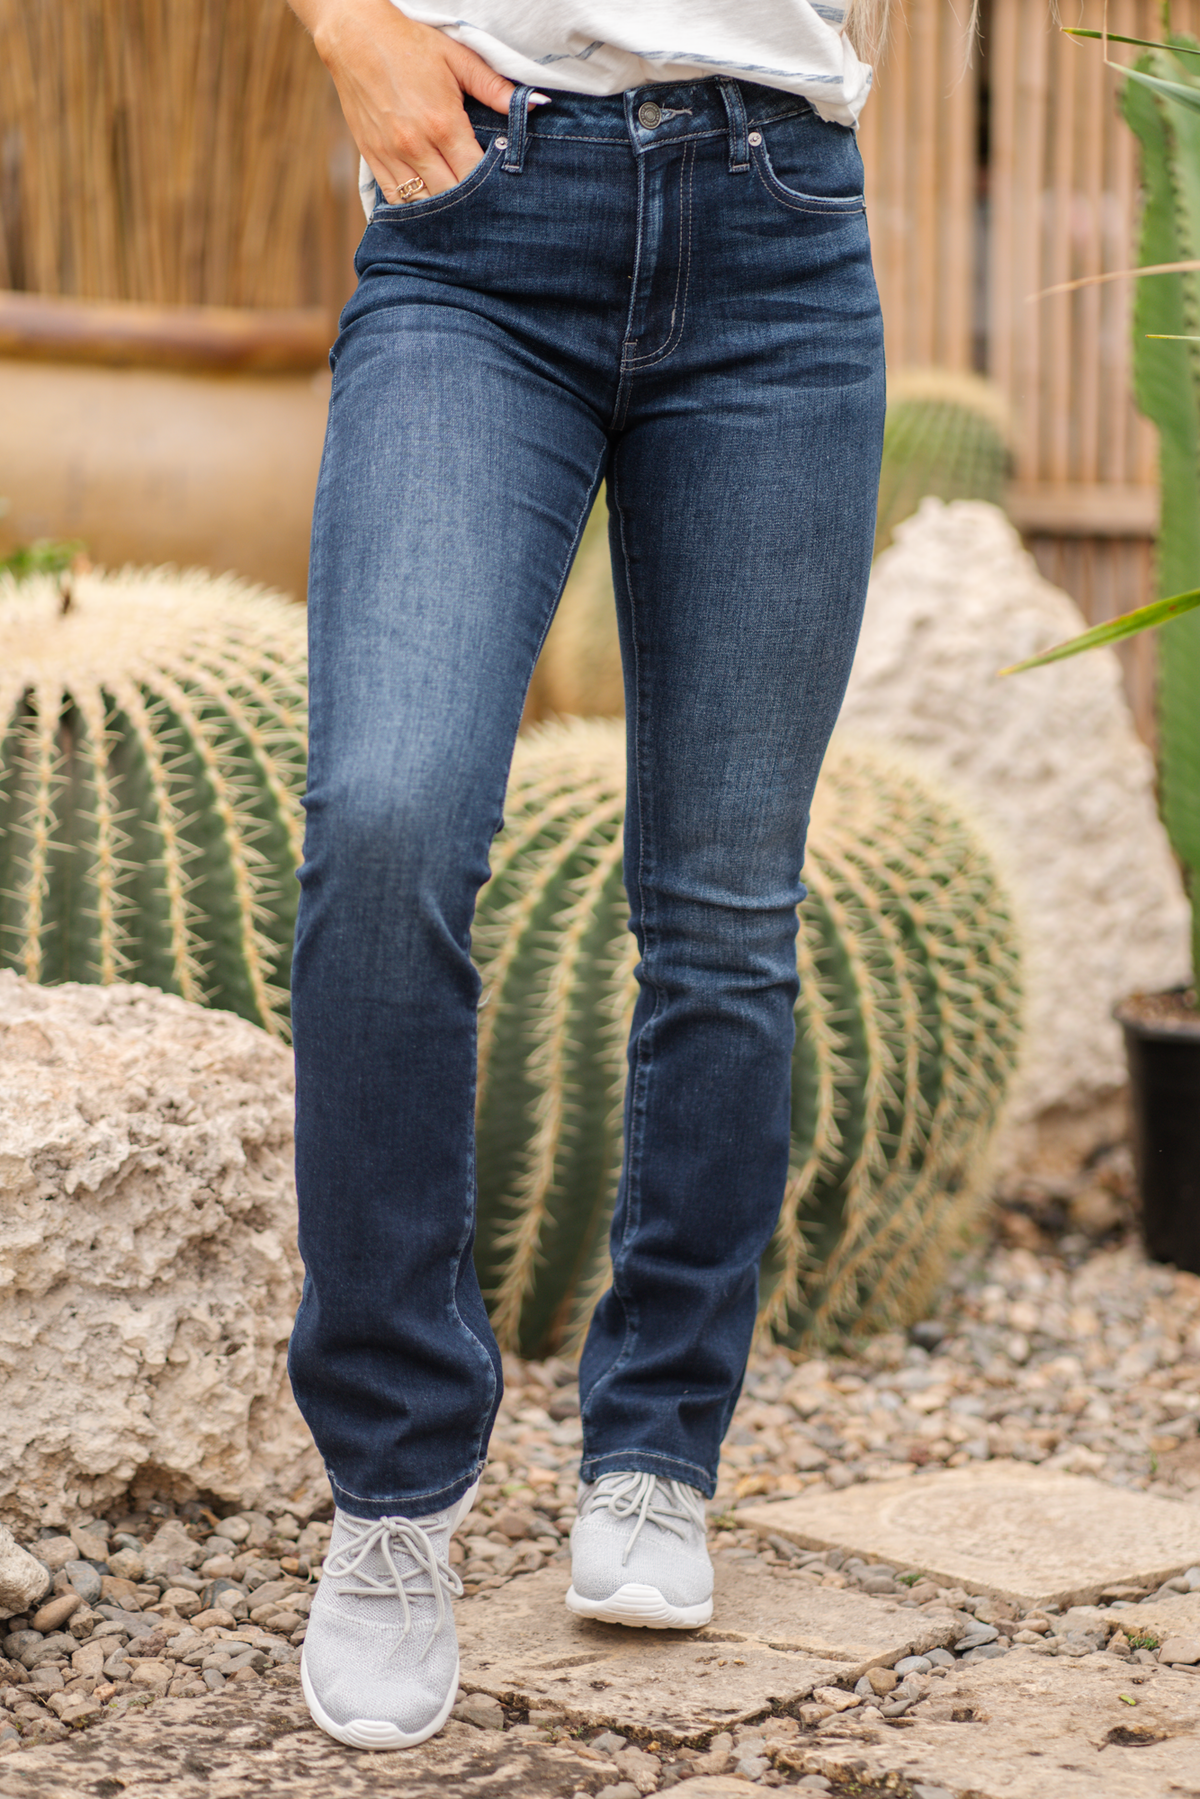 KanCan Jeans  KanCan Stretch Level: Stretchy  Color: Dark Blue Cut: Boot Cut, 32" Inseam* Rise: High-Rise, 10" Front Rise* 68% COTTON, 30% POLYESTER, 2%SPANDEX Stitching: Classic  Fly: Zipper Style #: KC8683D  Contact us for any additional measurements or sizing.  *Measured on the smallest size, measurements may vary by size.